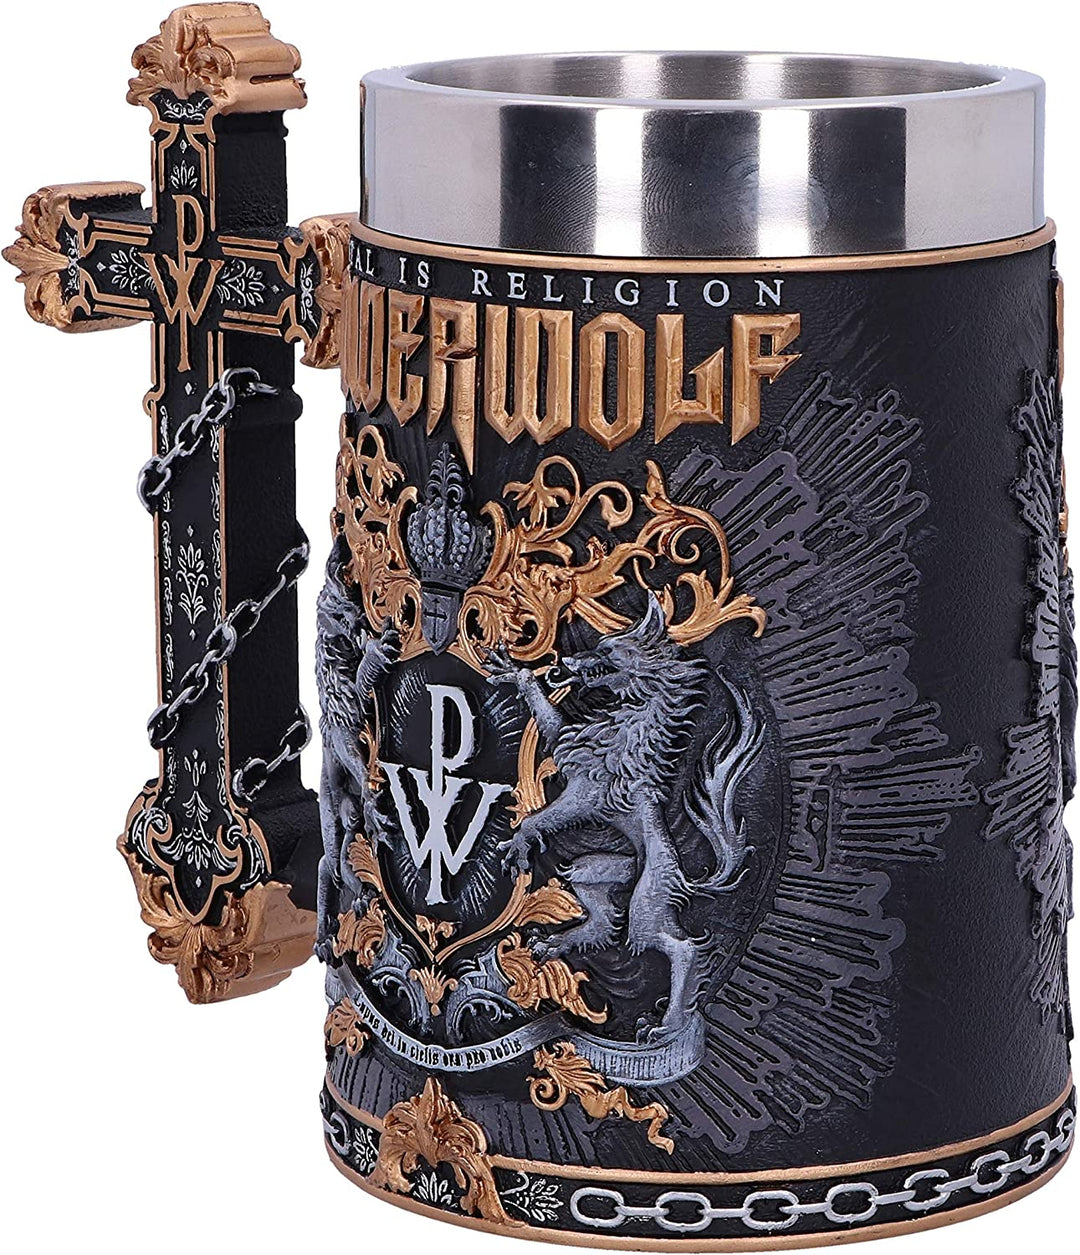 Nemesis Now Officially Licensed Powerwolf Metal is Religion Rock Band Tankard, Black